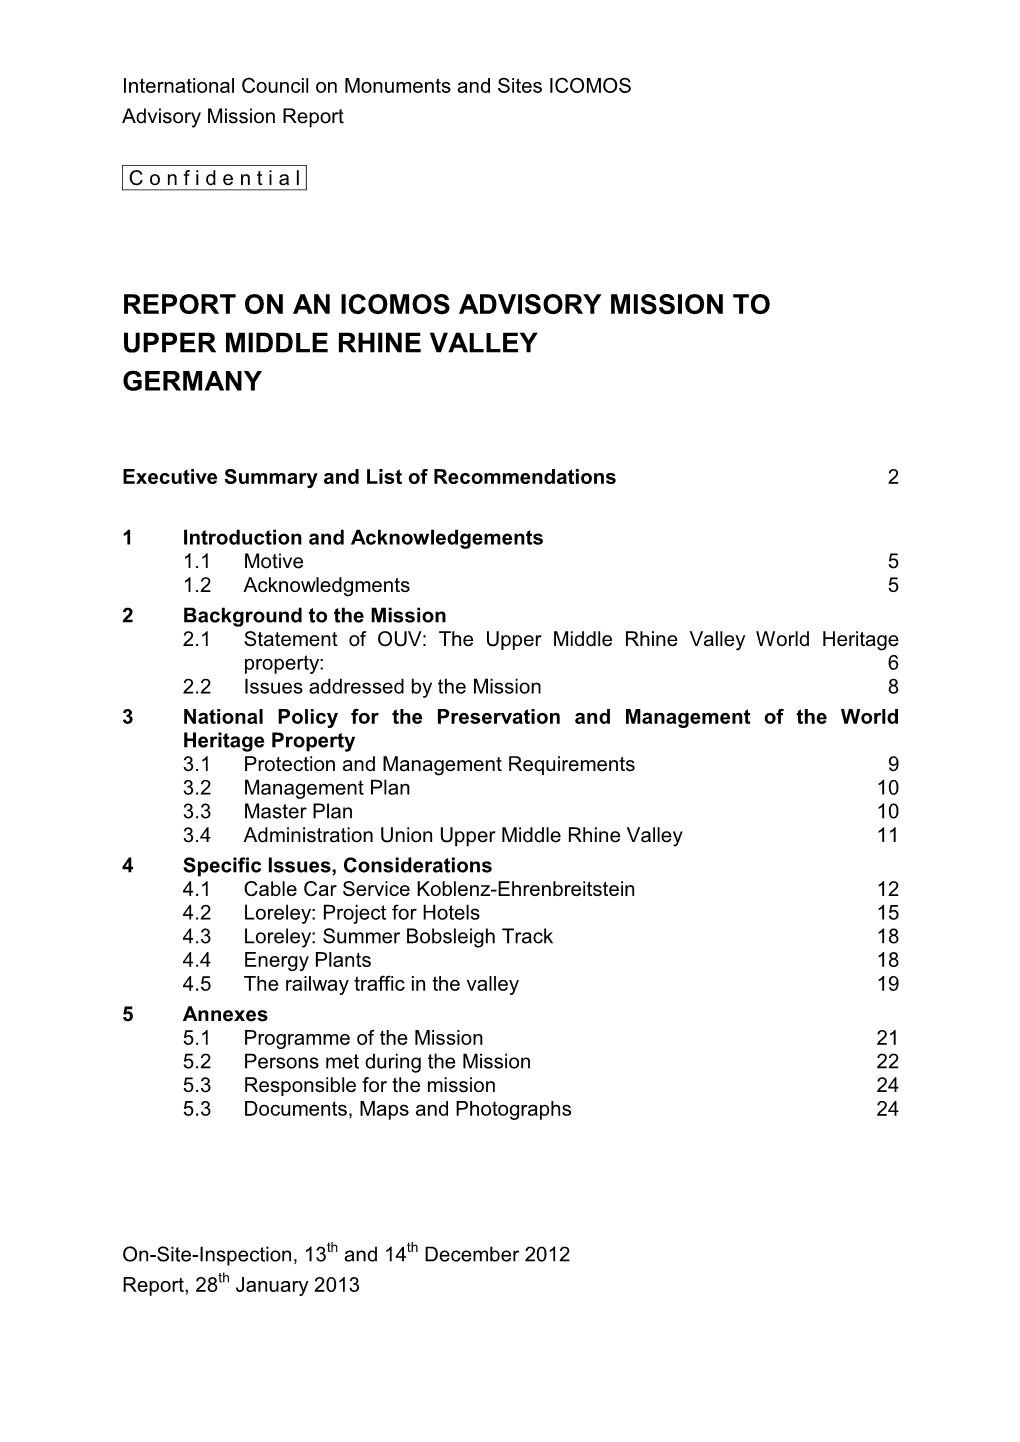 Report on the ICOMOS Advisory Mission to the Upper Middle Rhine